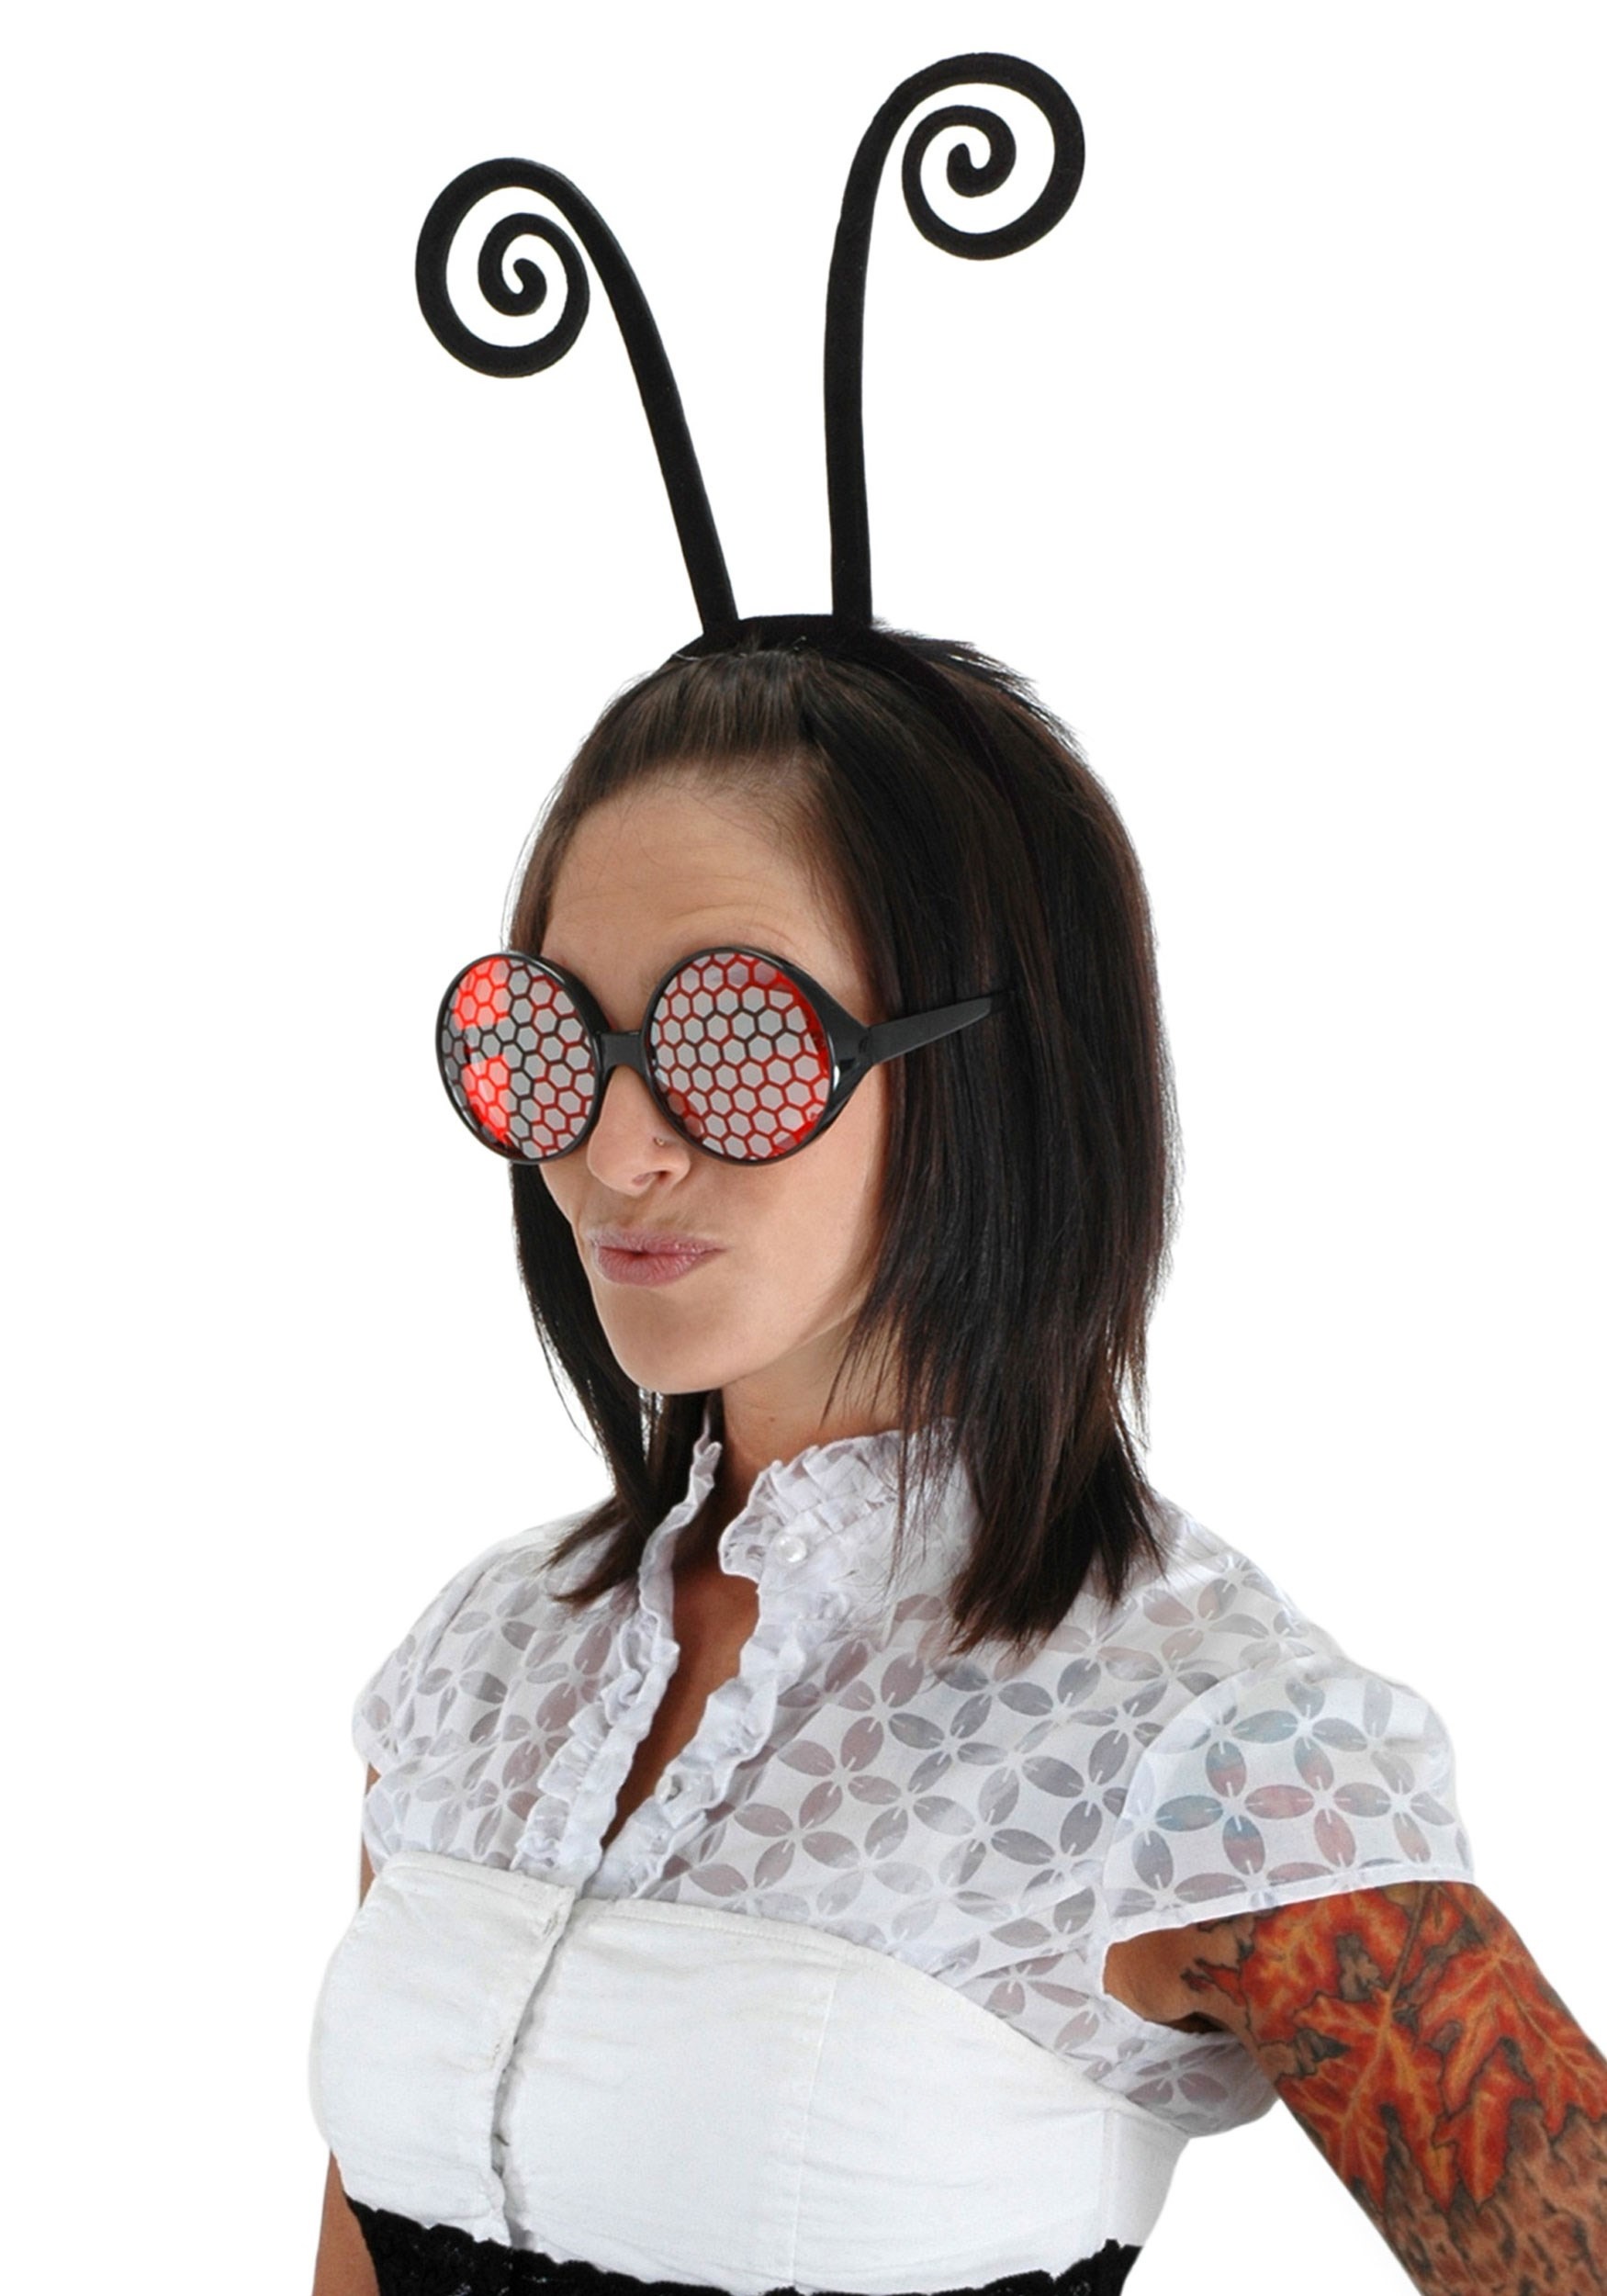 Antenna Headband Accessory , Insect Fancy Dress Costume Accessories